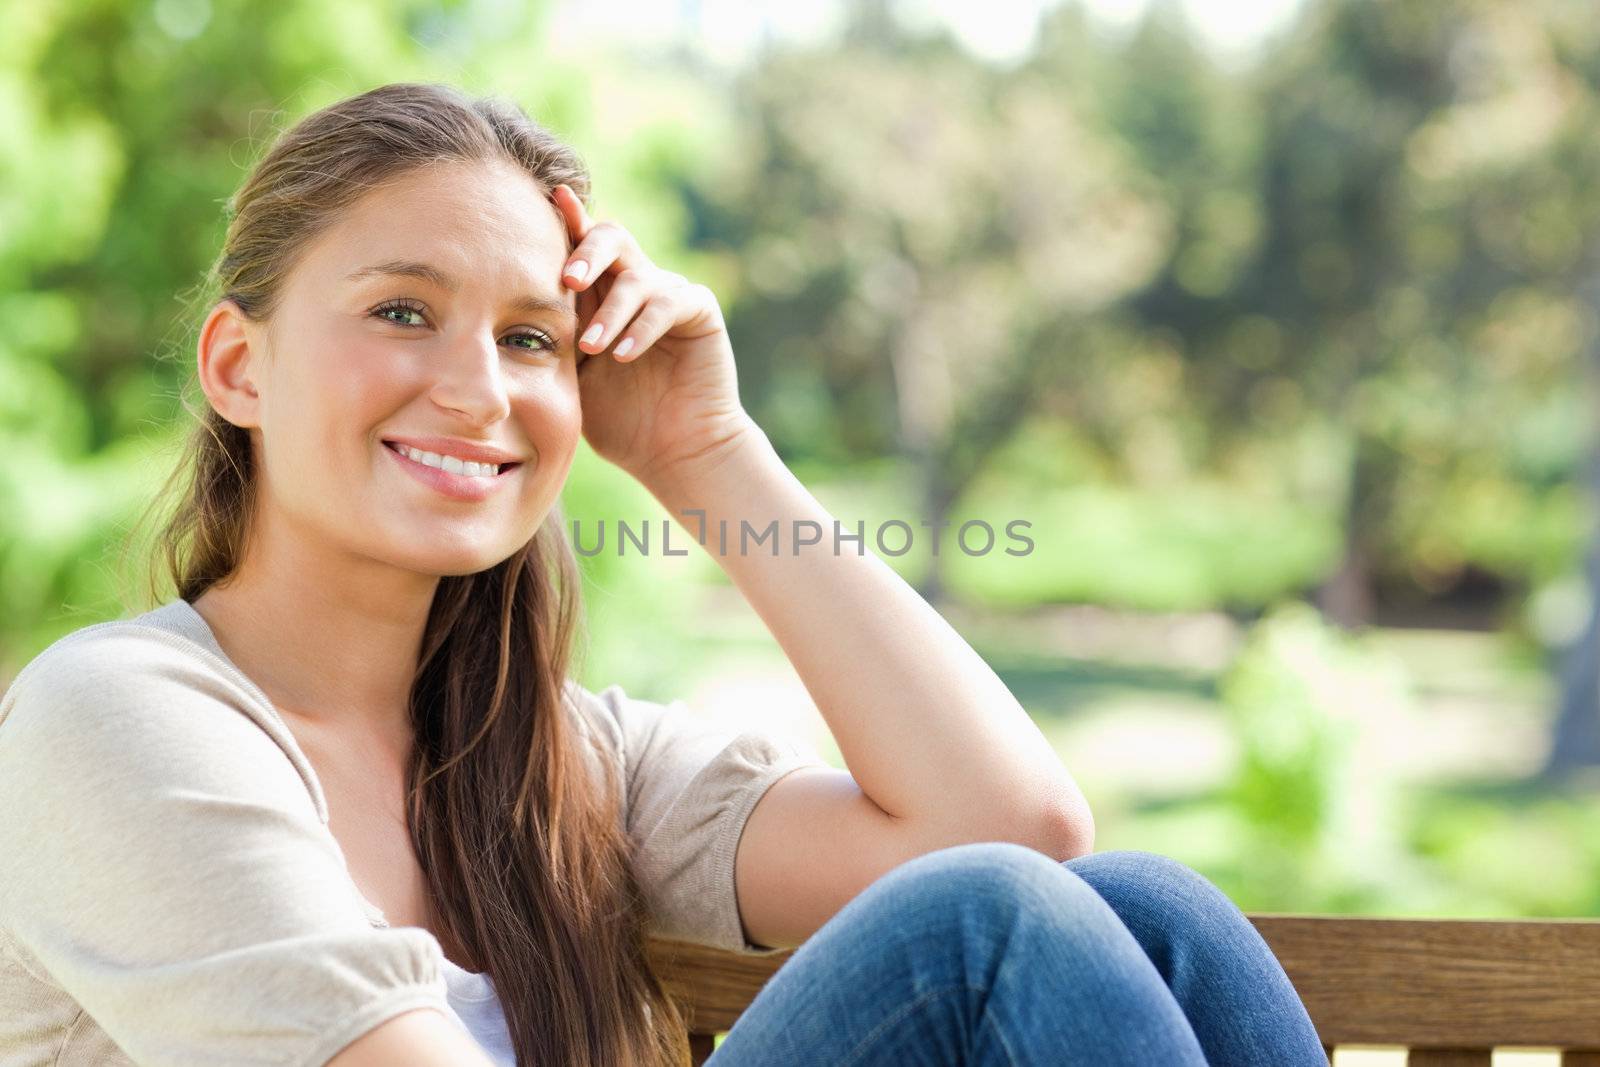 Smiling woman on a bench in the park by Wavebreakmedia